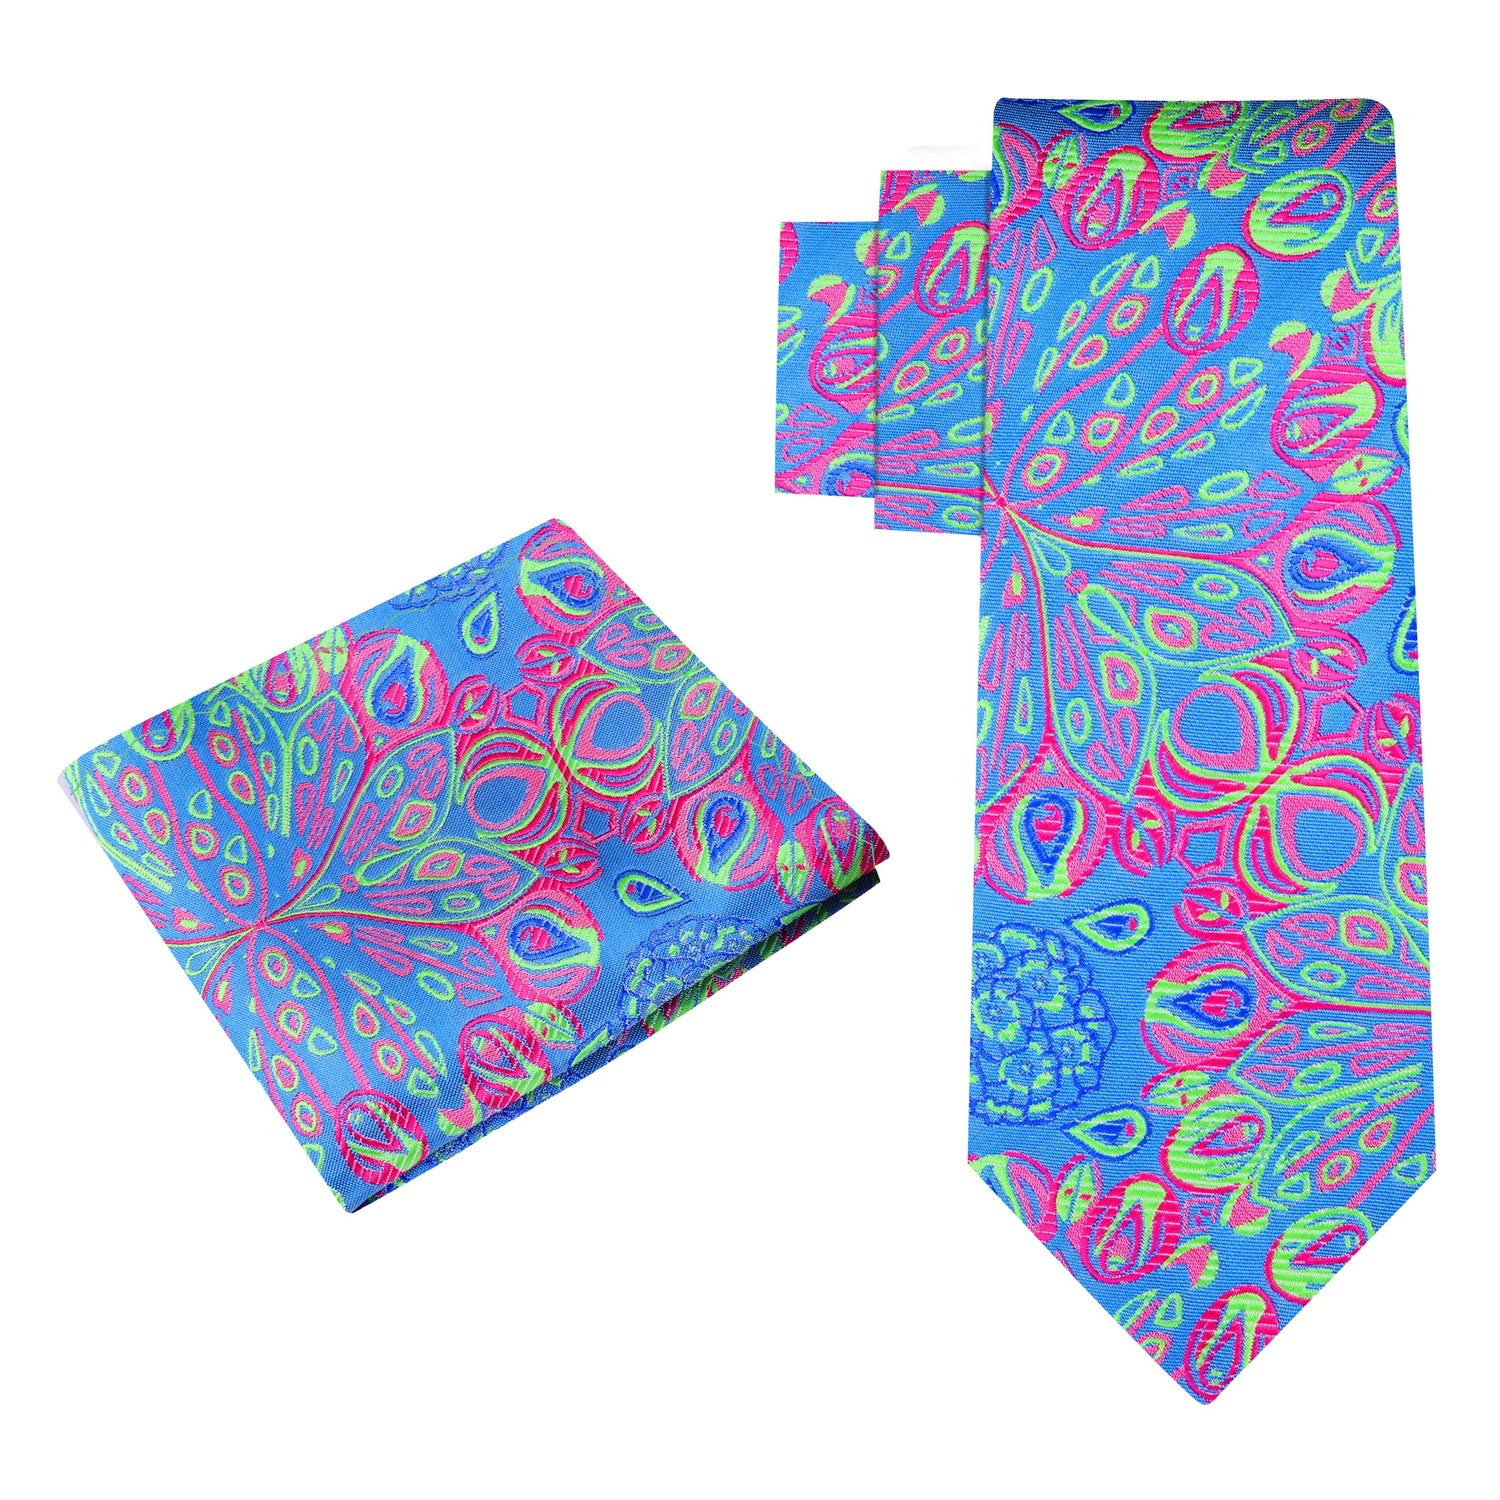 Alt View: A Neon Yellow, Pink, Light Blue, Green Abstract Peacock Feather Pattern Silk Necktie, Matching Pocket Square